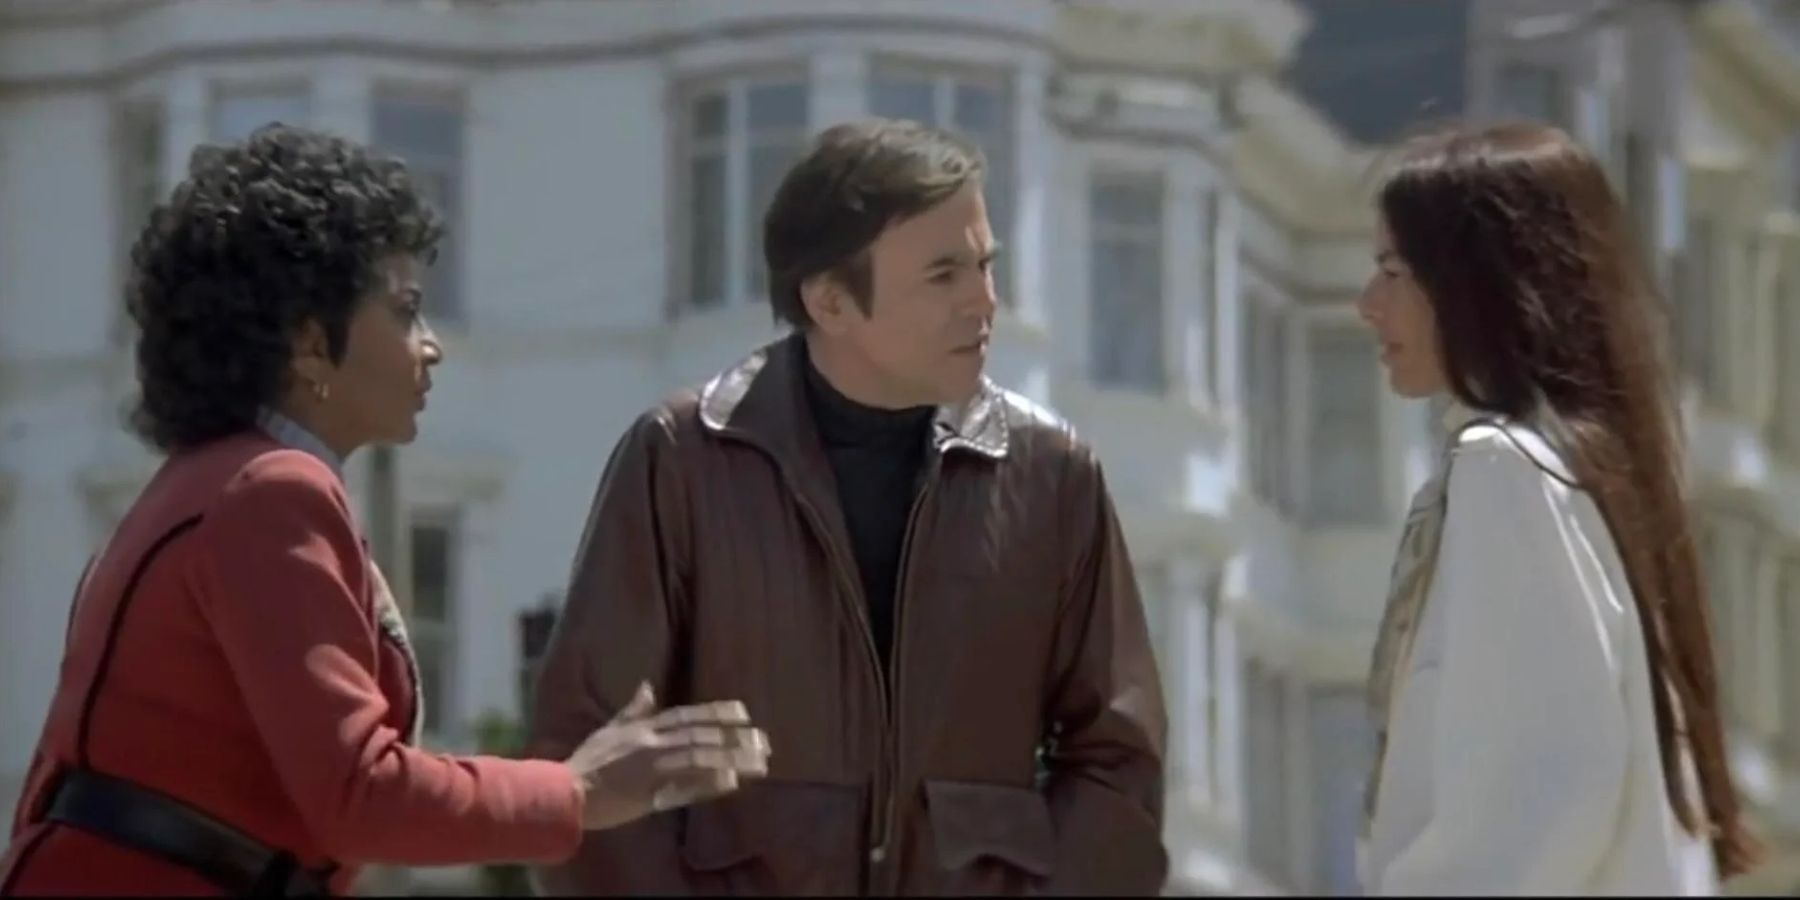 Image of Uhura and Chekov asking a woman in the 1980s for directions